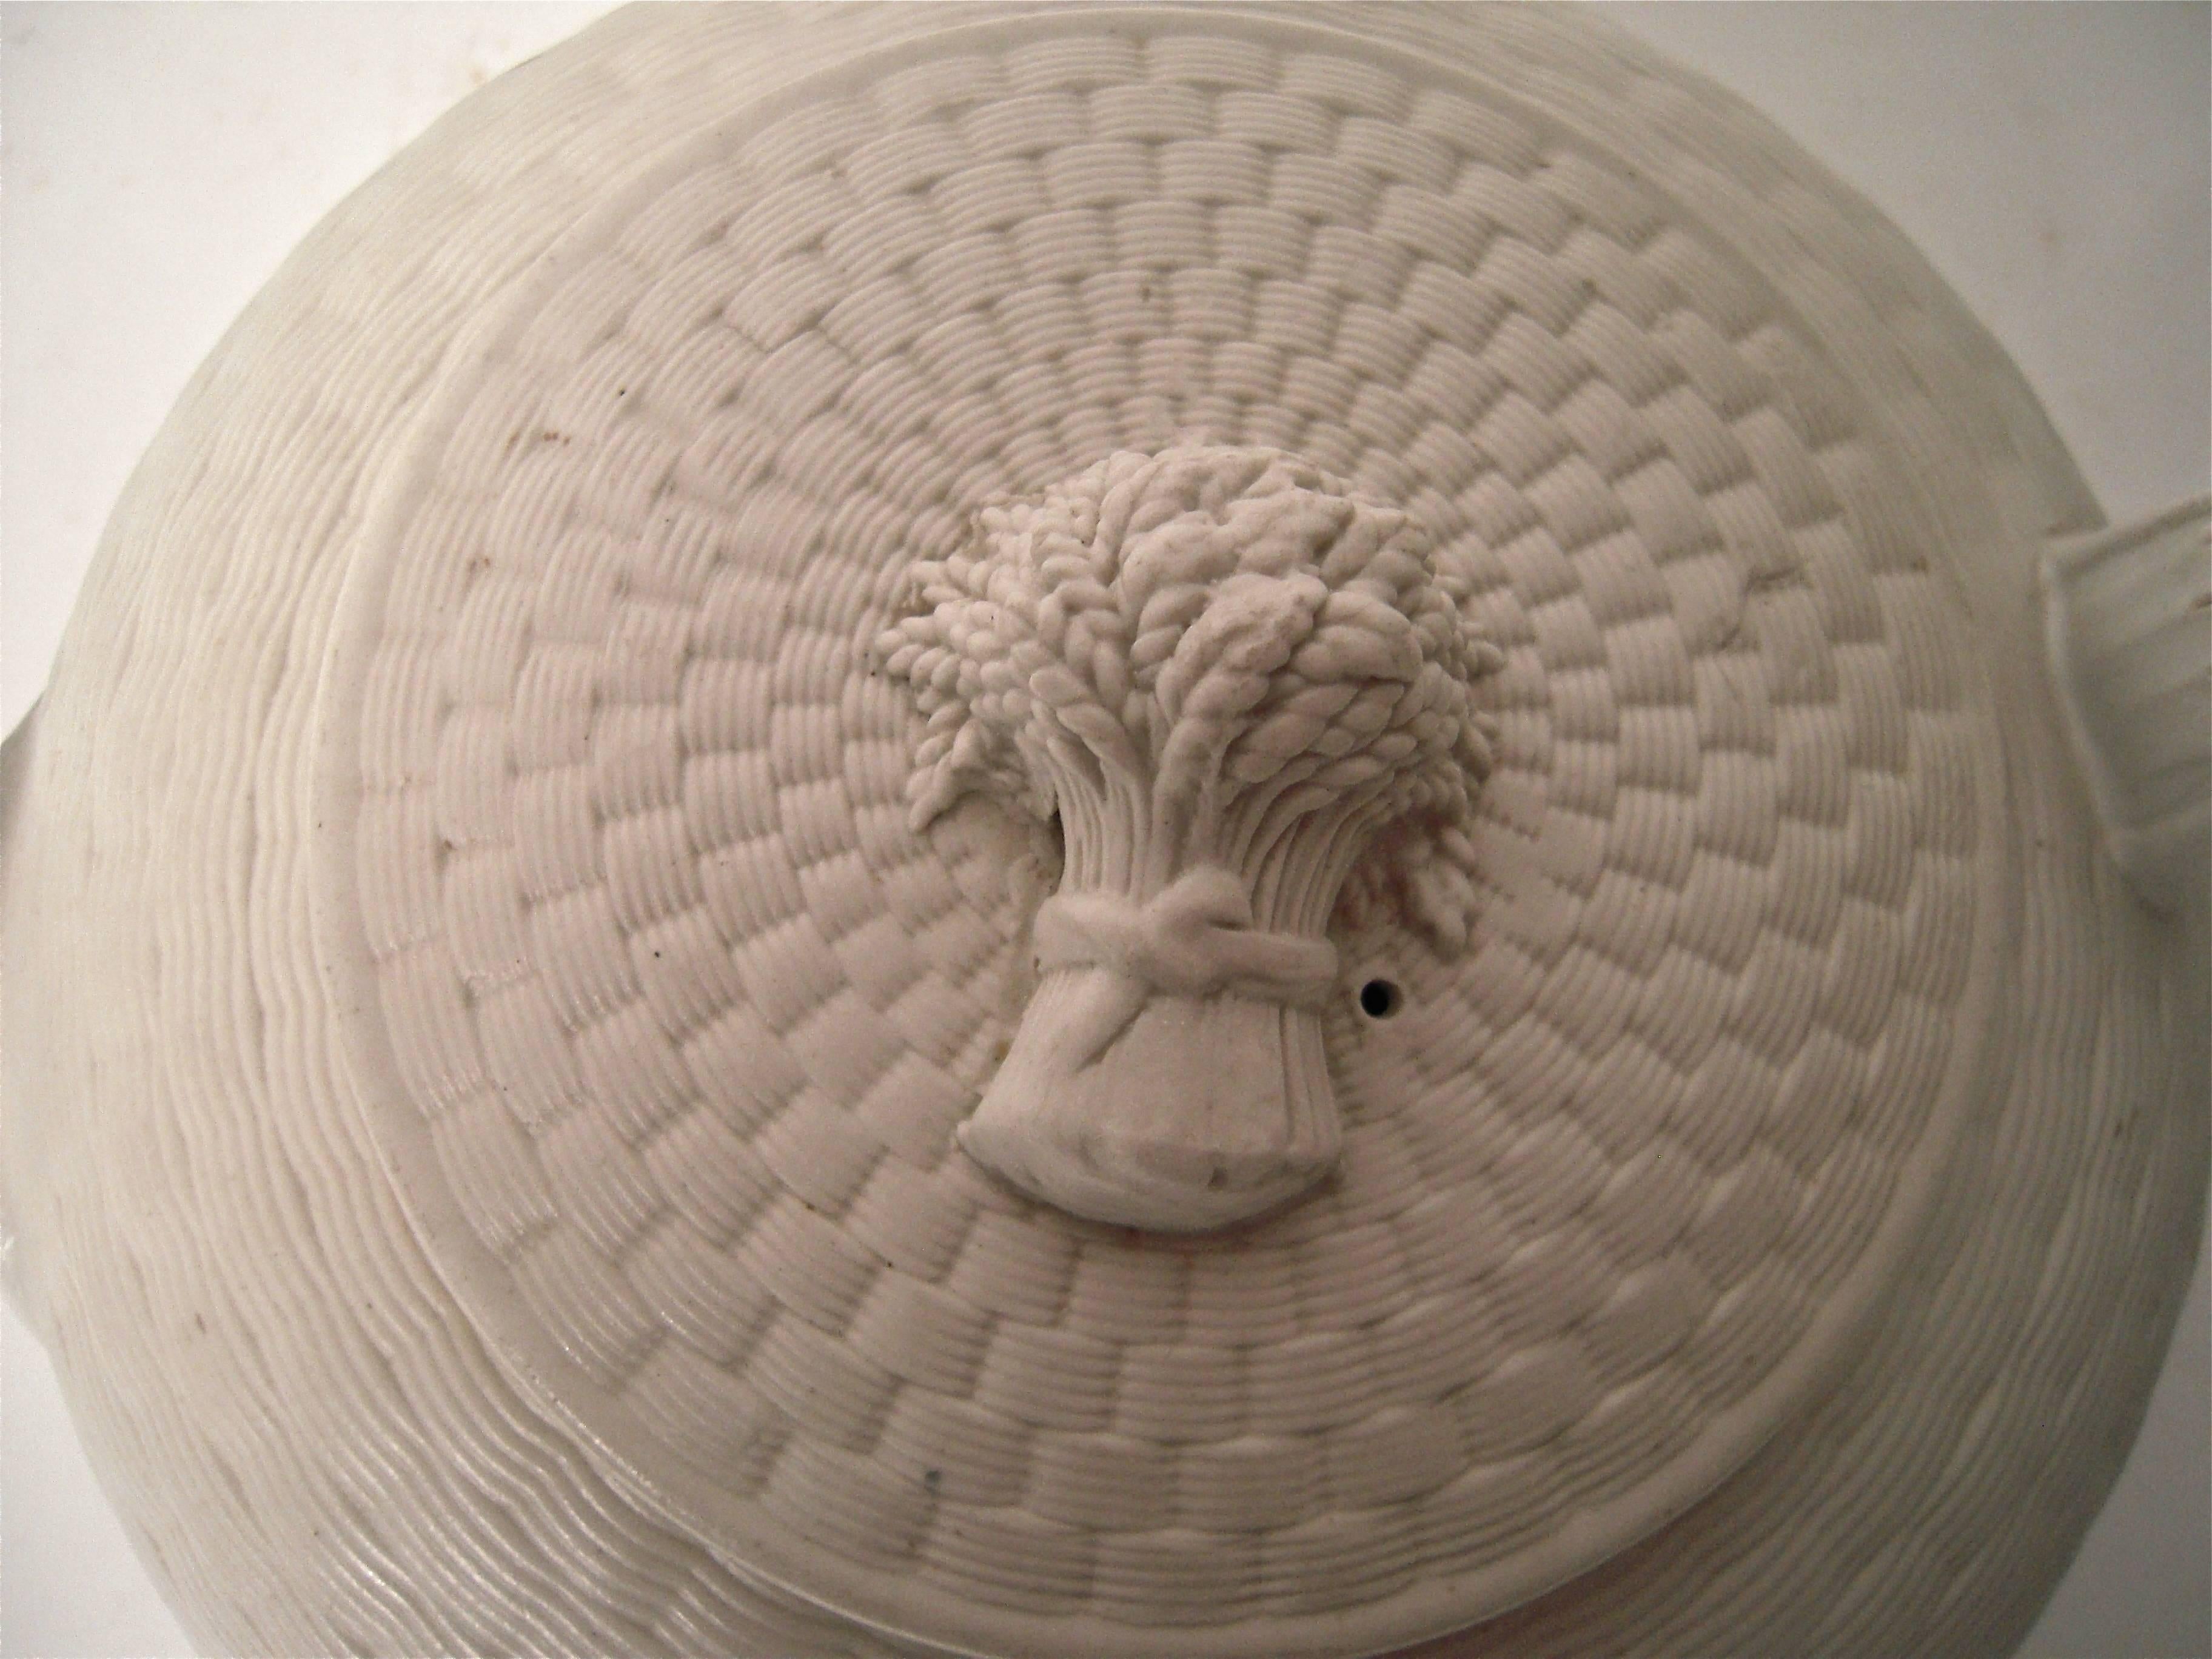 A 19th century Wedgwood white stoneware tea pot of compressed circular form, with overall basket weave decoration and sheaf of wheat finial, with acanthus leaf decoration under the spout. Impressed mark on bottom. Beautifully modeled and very